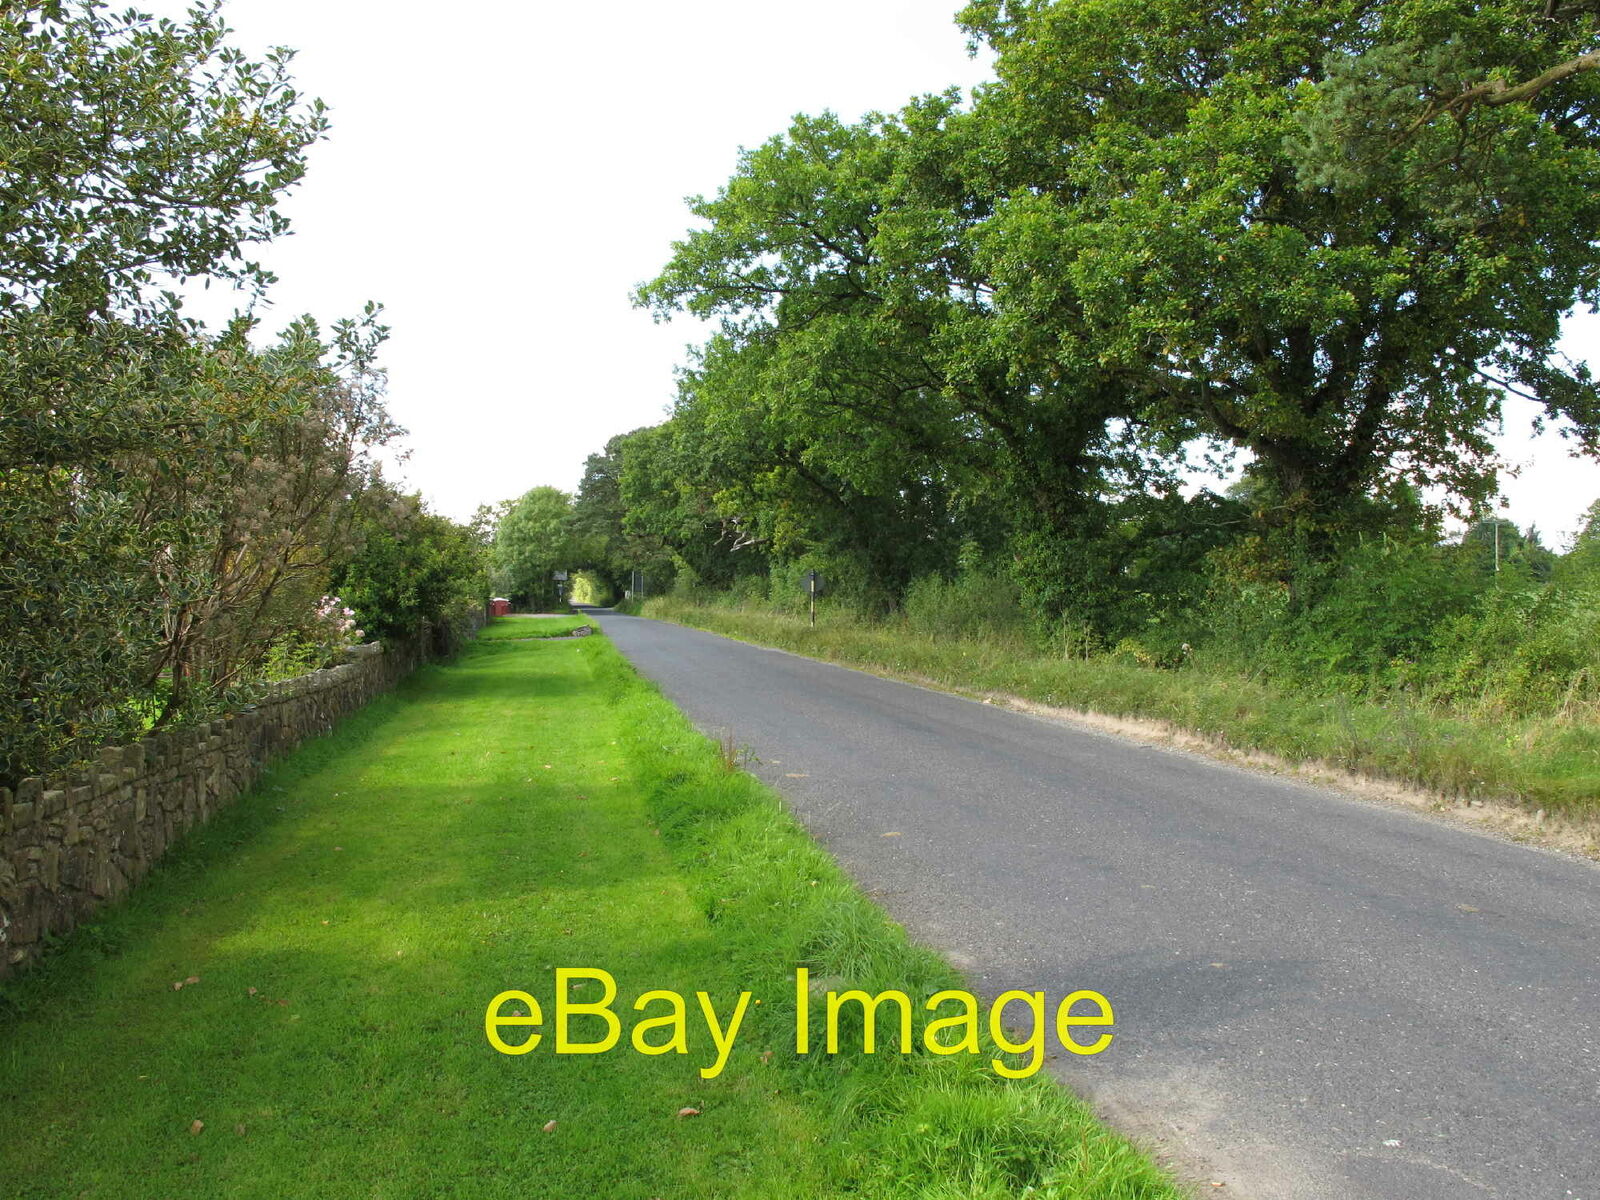 Photo 6x4 Road - R471 to Sixmilebridge View from Junction with R463. c2010